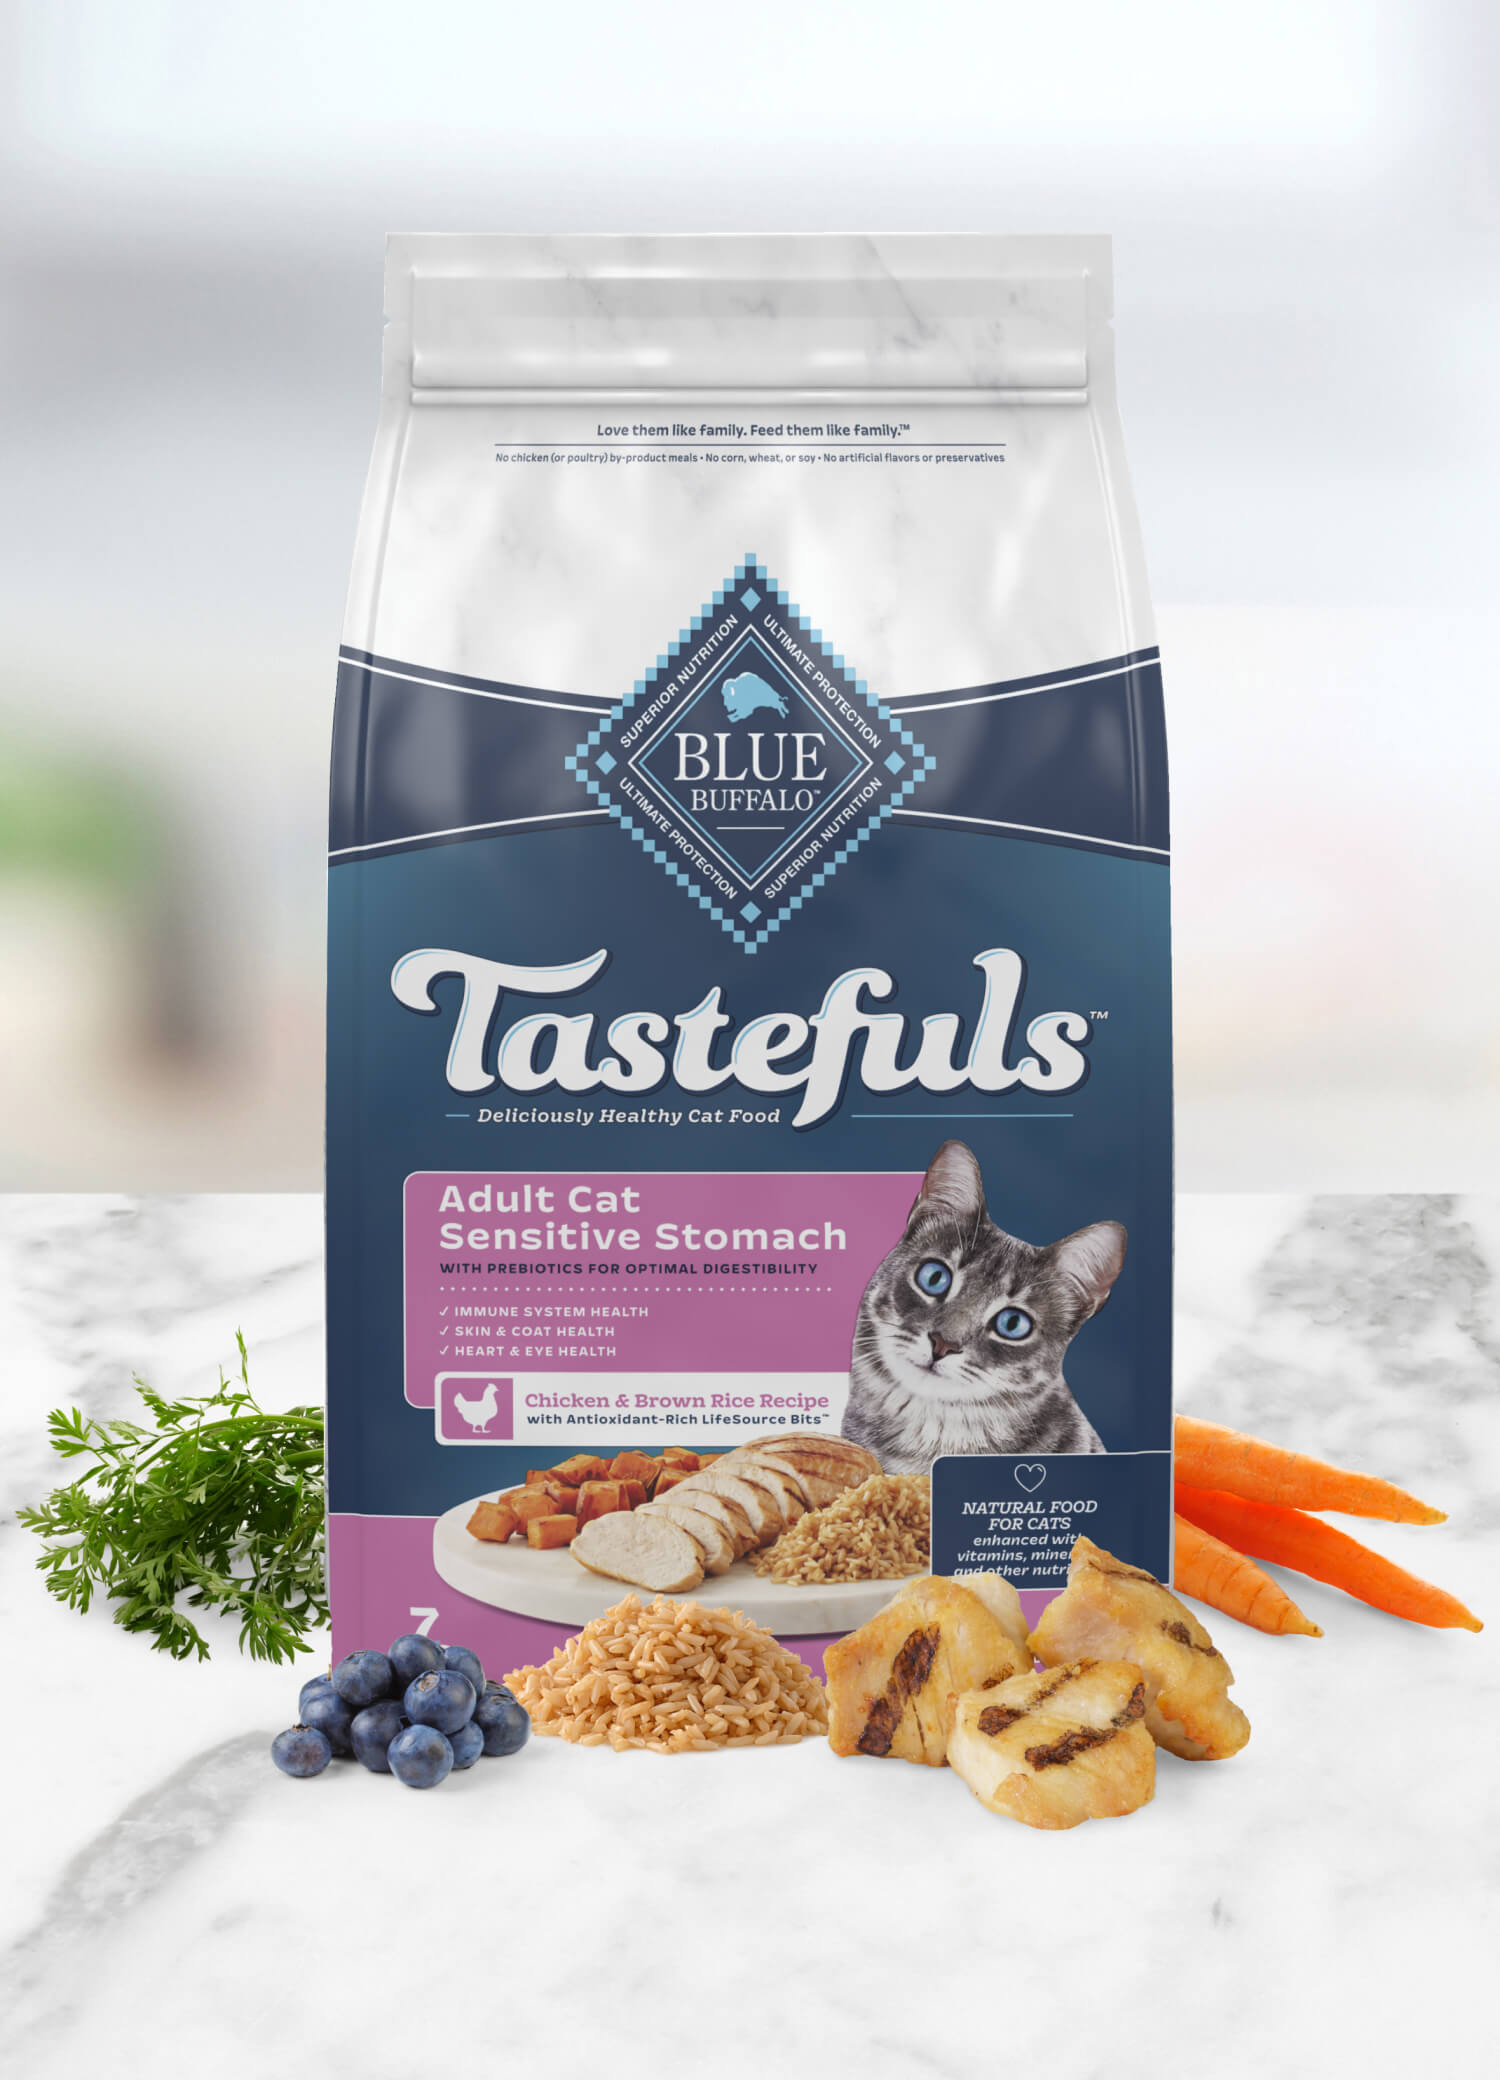 A bag of Blue Buffalo Tastefuls adult cat food for sensitive stomachs with chicken and brown rice, surrounded by fresh ingredients like parsley, carrots, and blueberries.